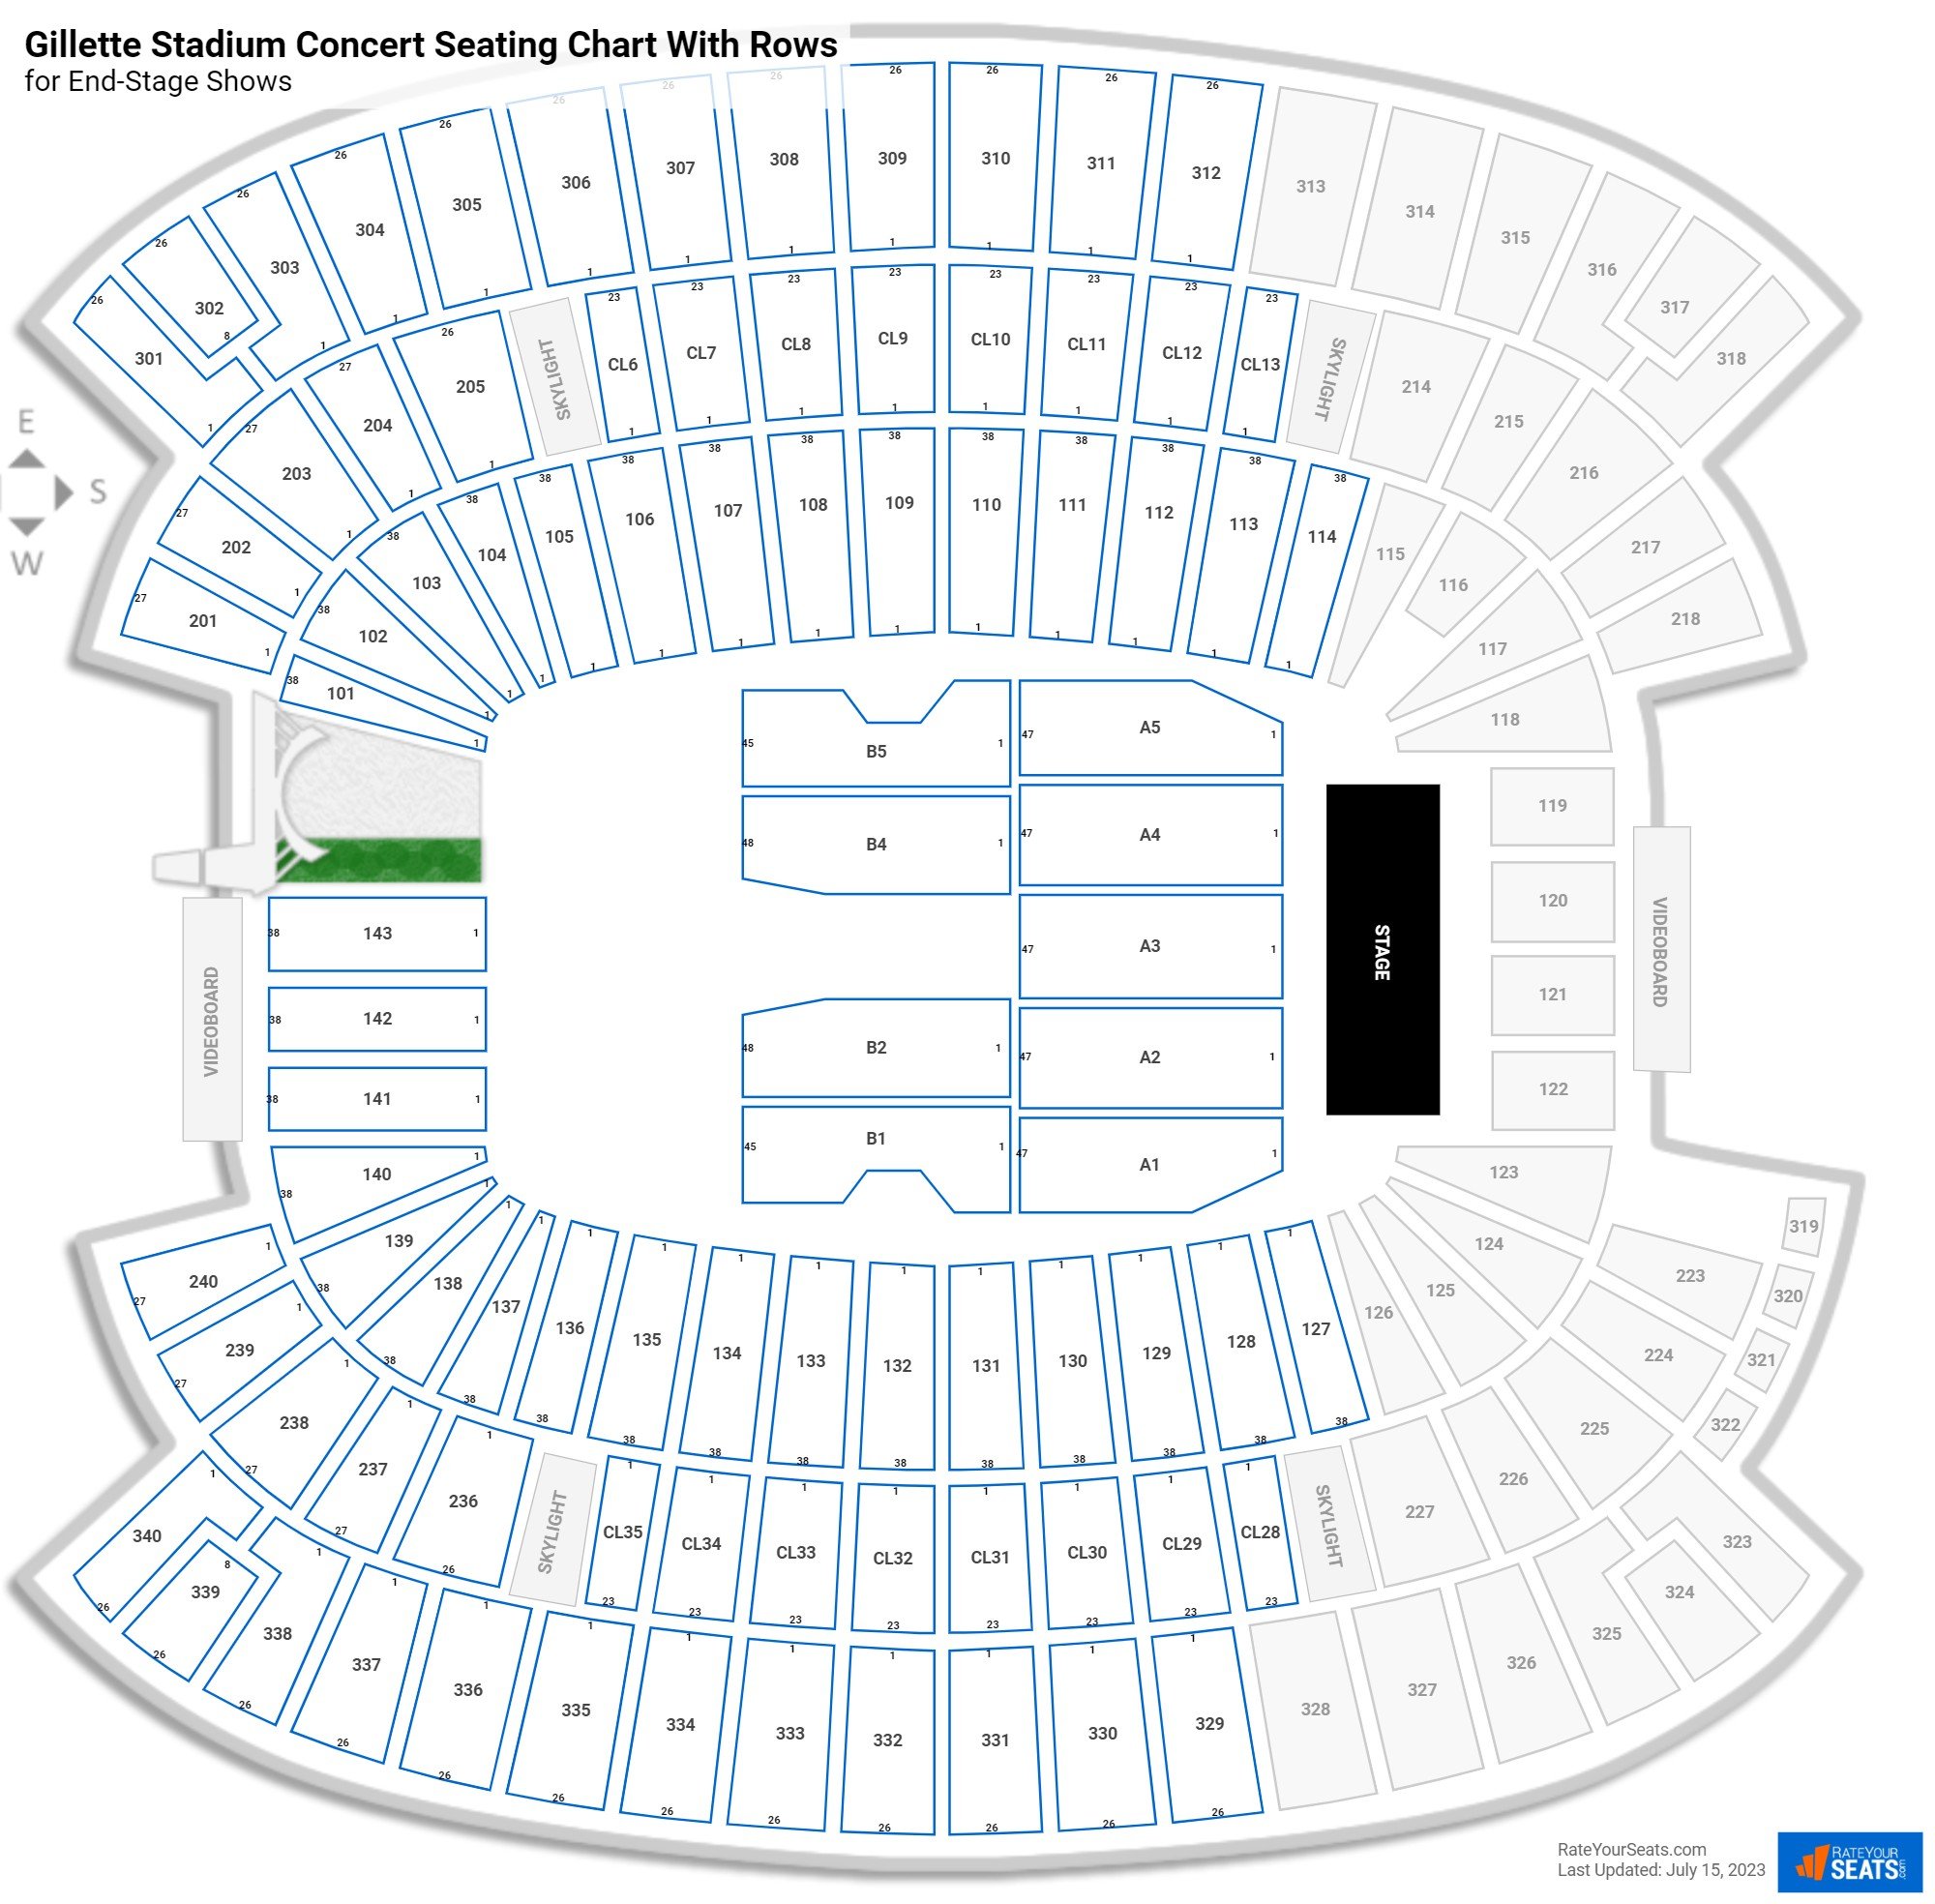 Gillette Stadium Concert Seating Chart With Rows For End Stage Shows 